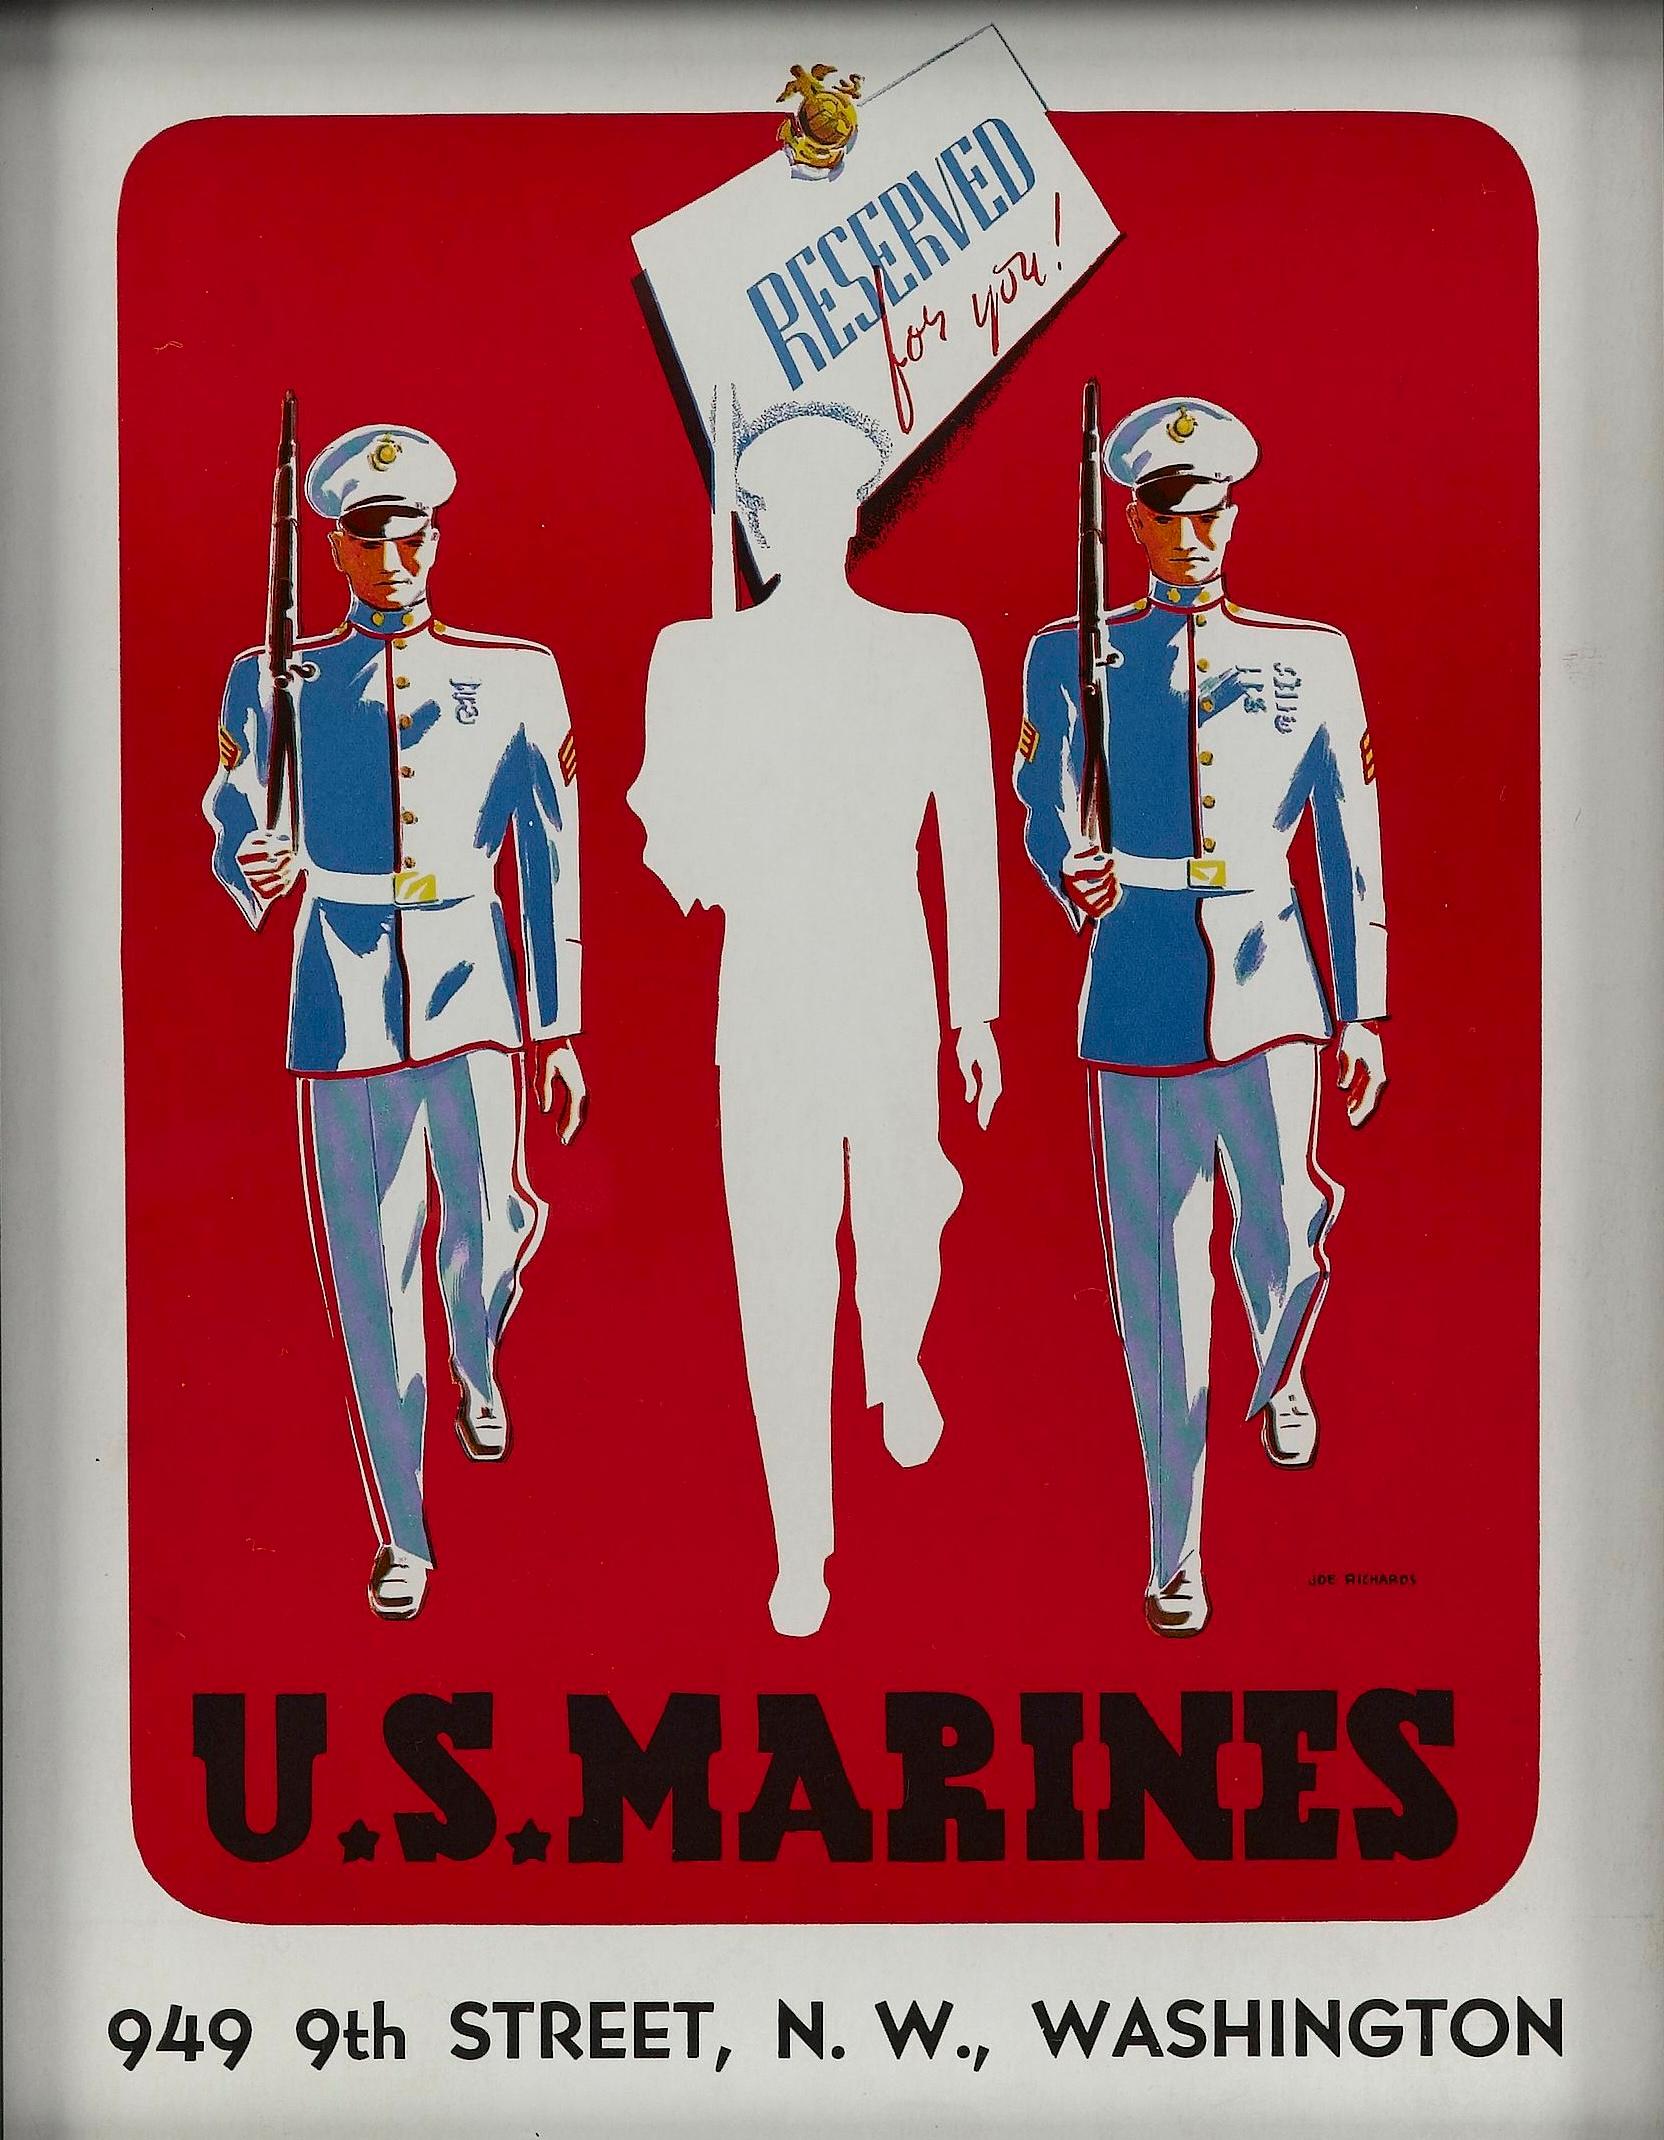 This is an original World War II Marines recruitment poster, designed by Joe Richards. The poster, a color lithograph, was issued on November 28, 1941, less than 10 days before the attack on Pearl Harbor.

The poster depicts two Marines at left and